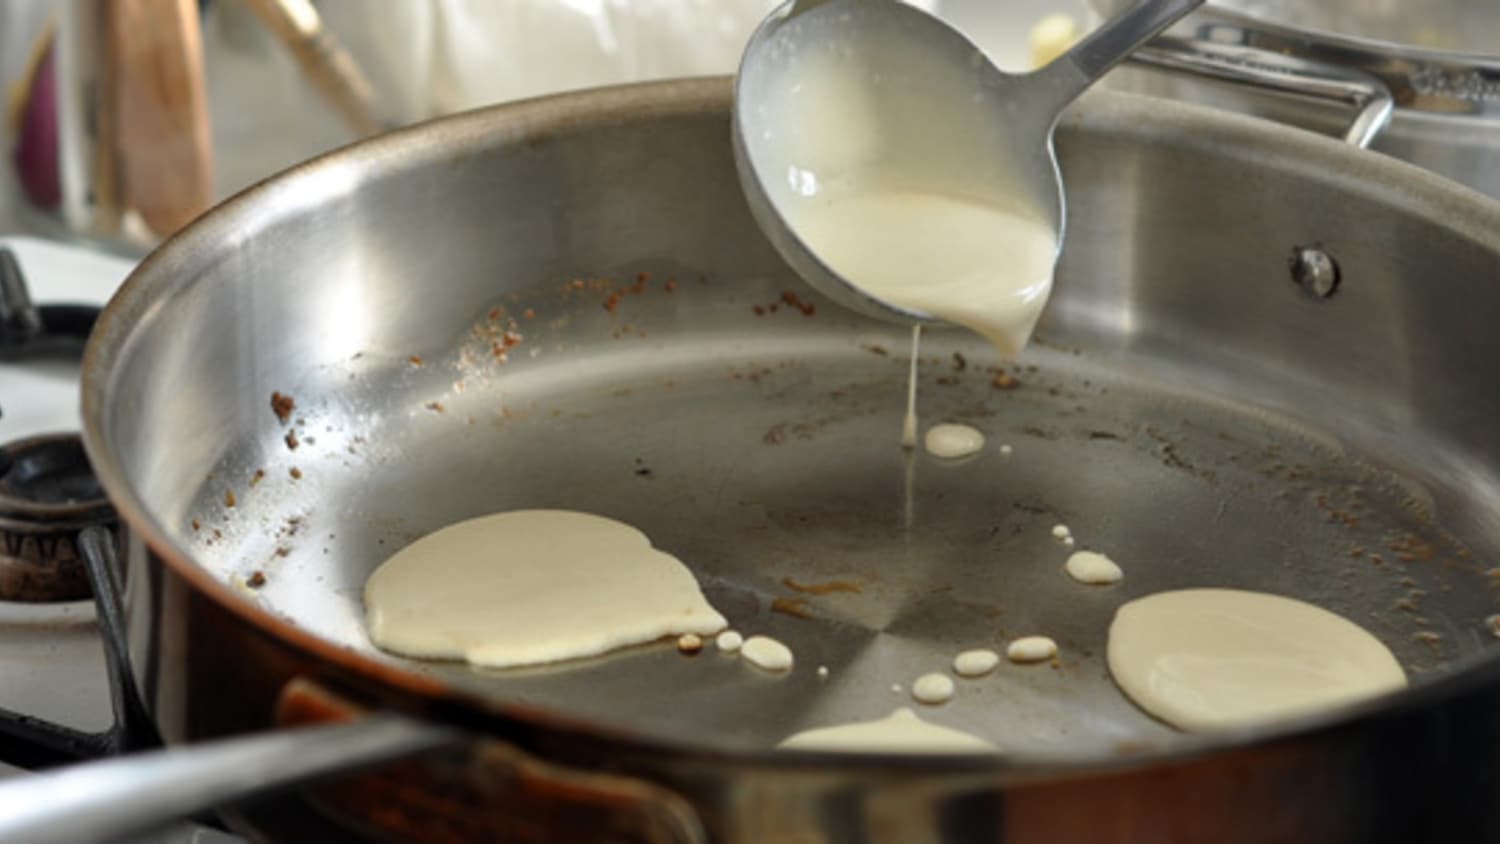 How Can I Cook Pancakes and Eggs in a Stainless Steel Pan?